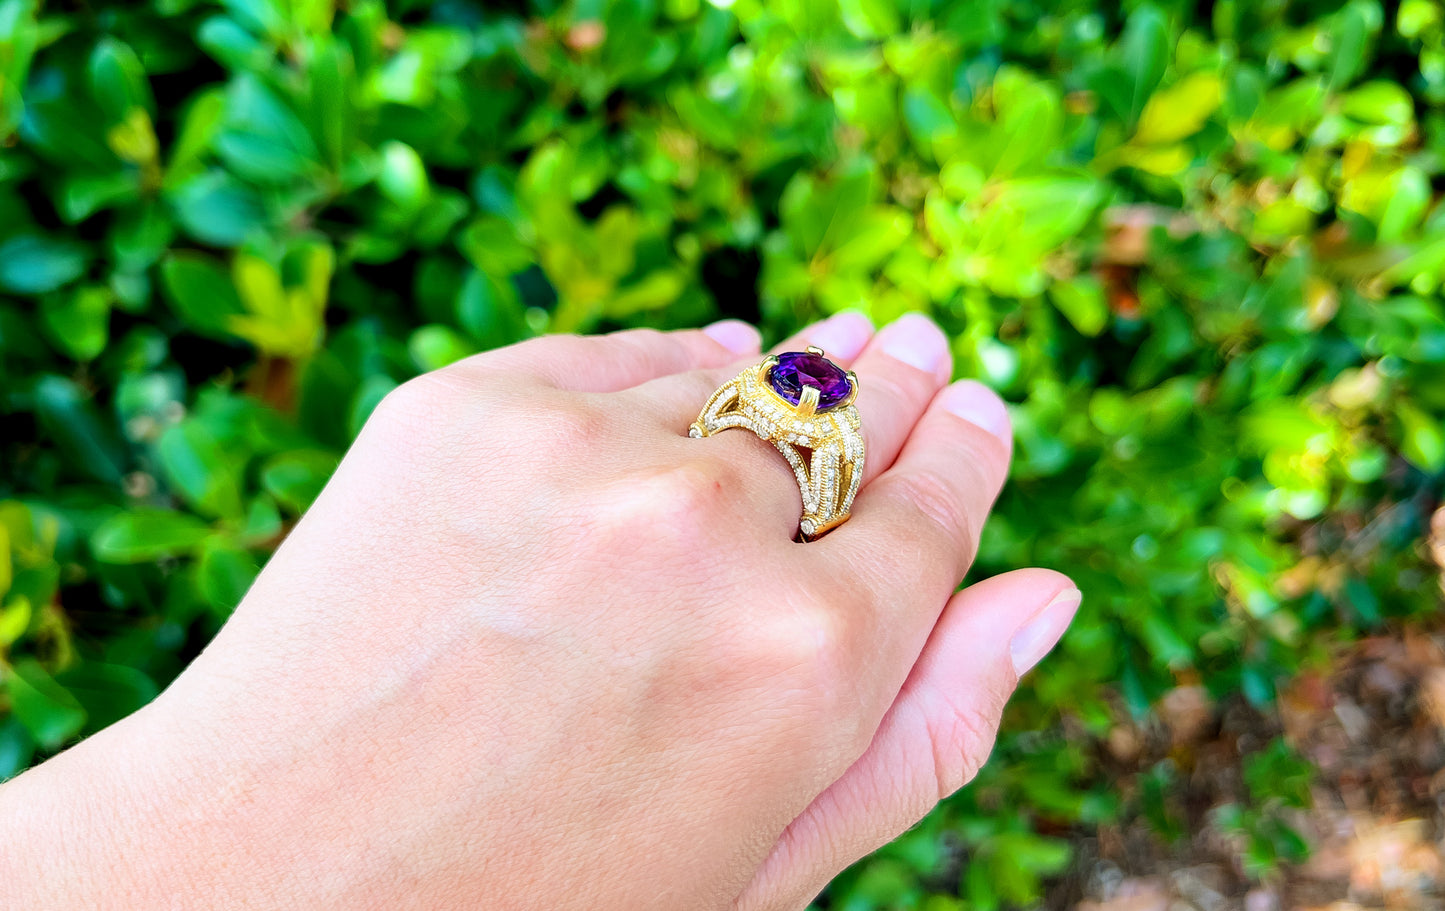 Amethyst 6 Carat Ring With Diamonds 1.50 Carats Total 14K Gold